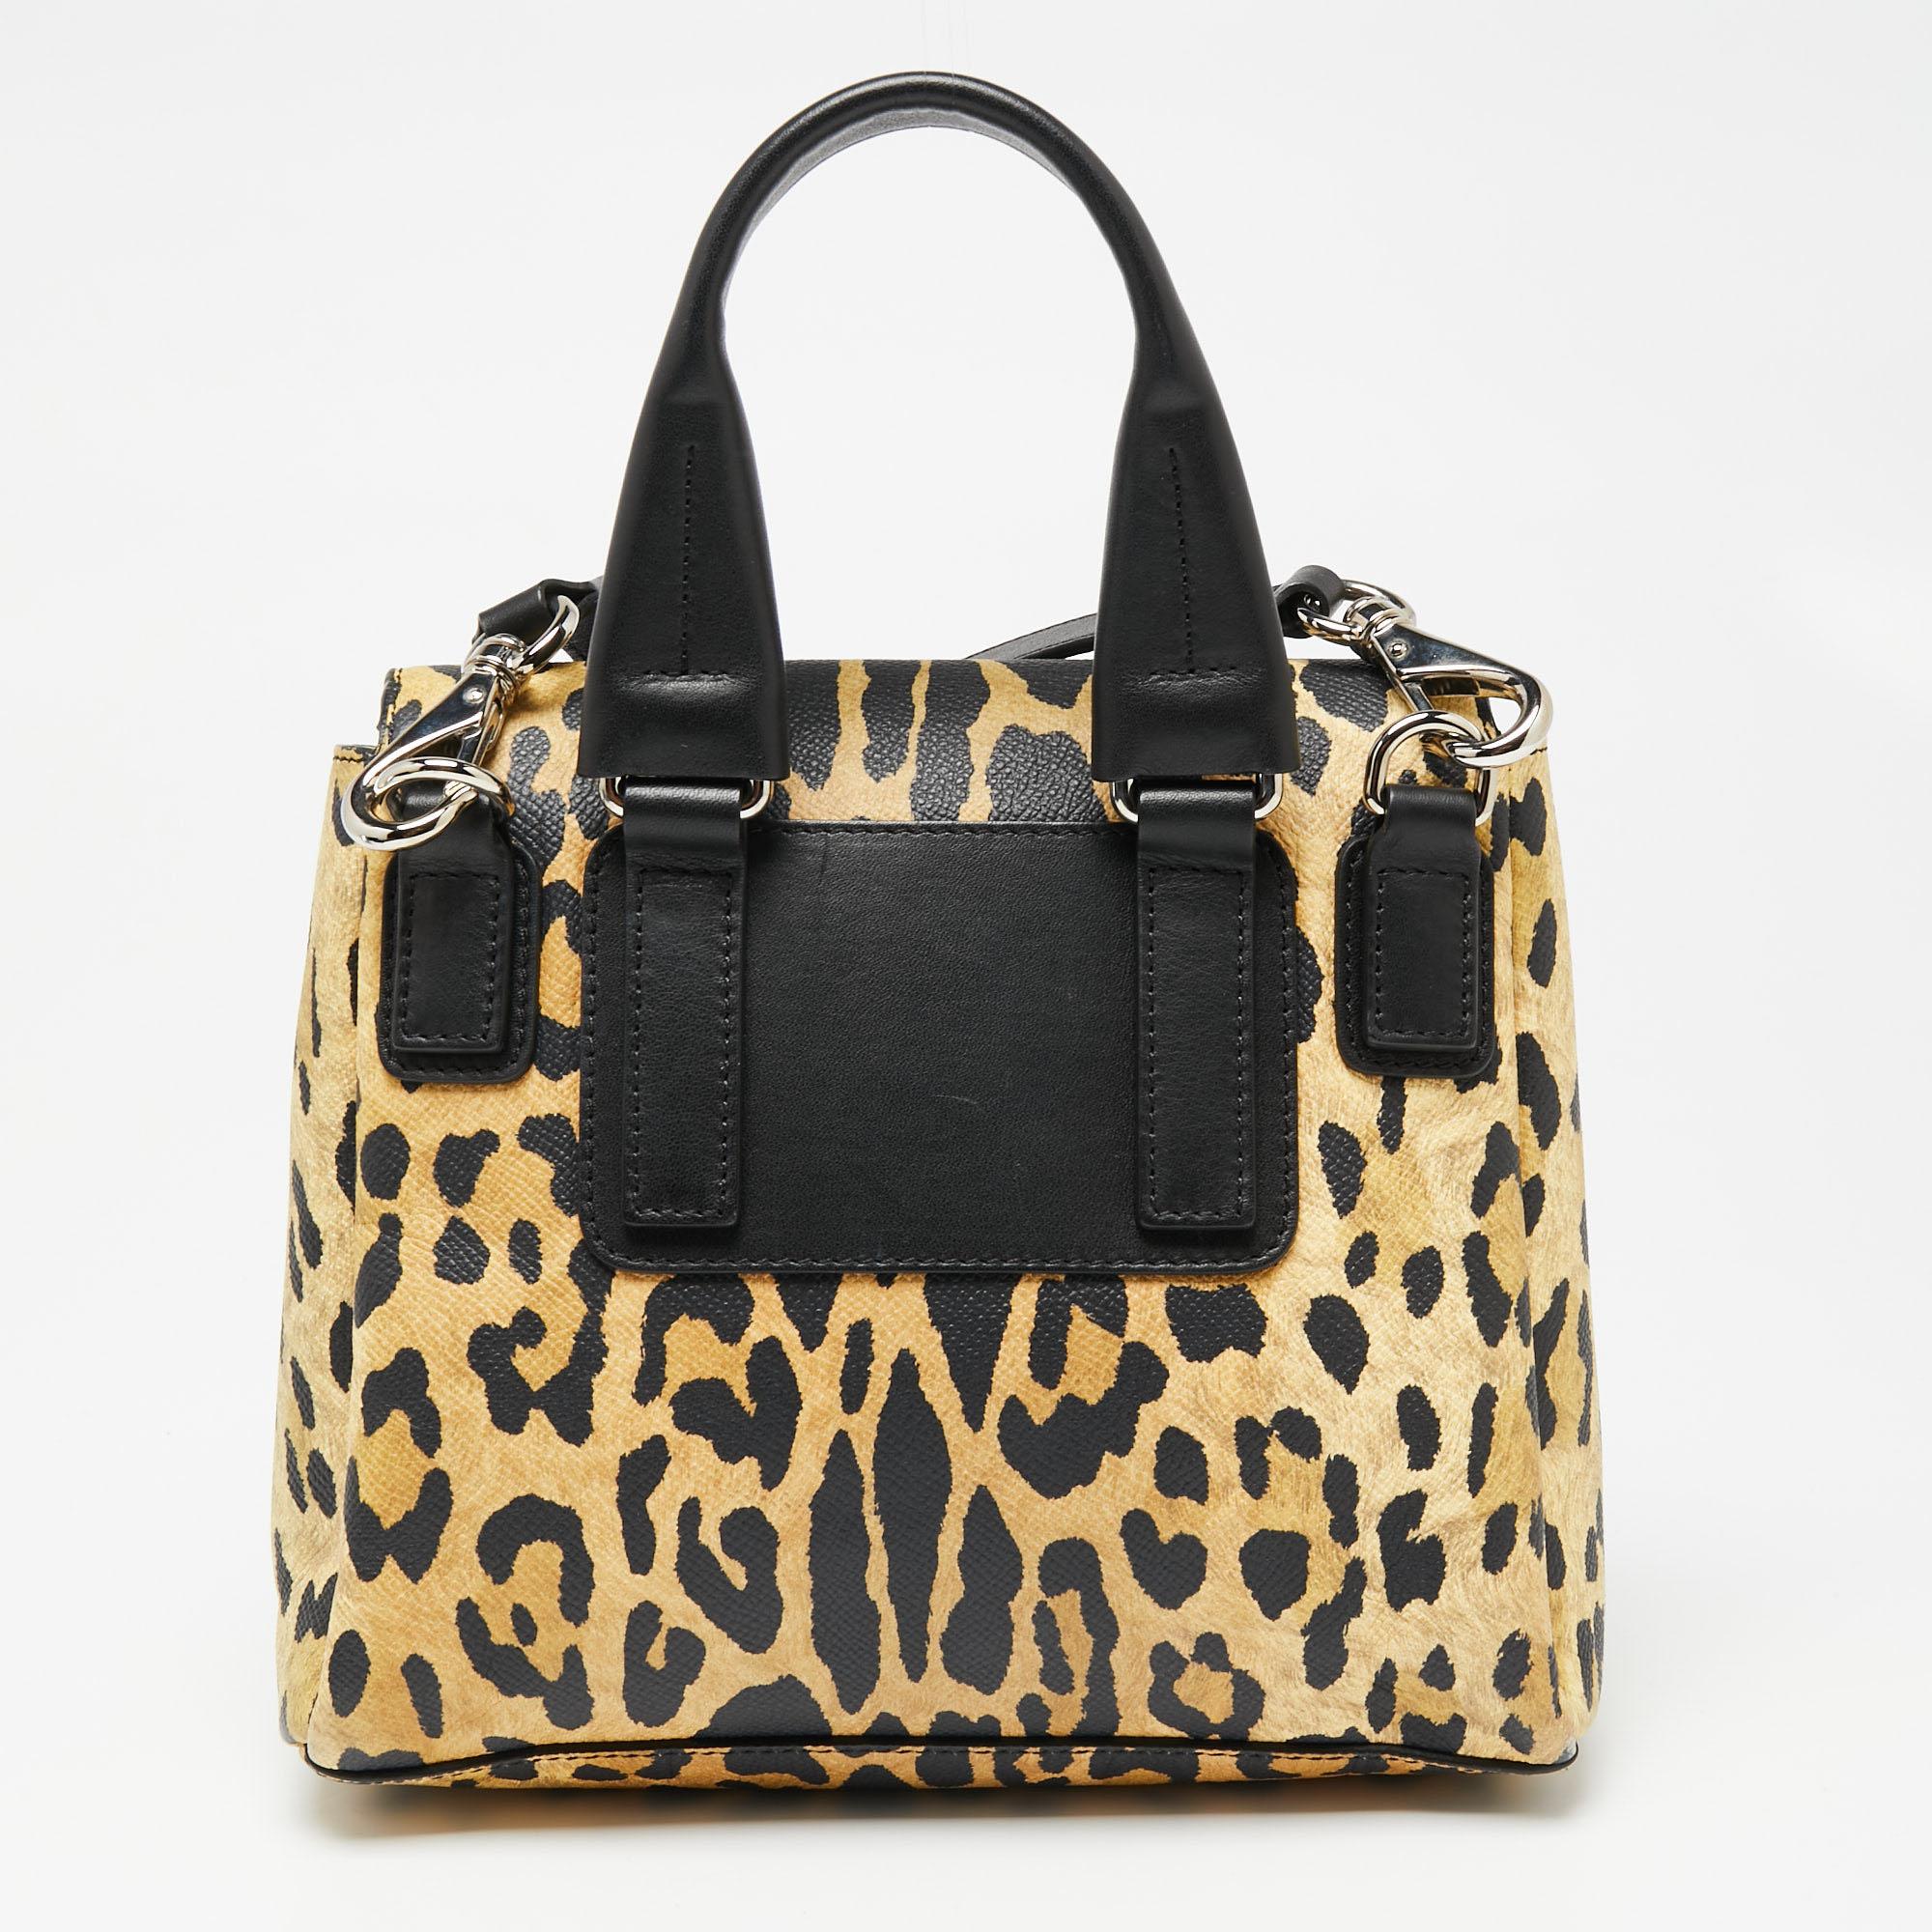 This bag from Givenchy in leopard print is stylish and functional. Crafted from leather, it features a front flap, a detachable shoulder strap, and a top handle. The insides are canvas-lined and the bag is complete with the brand logo on the